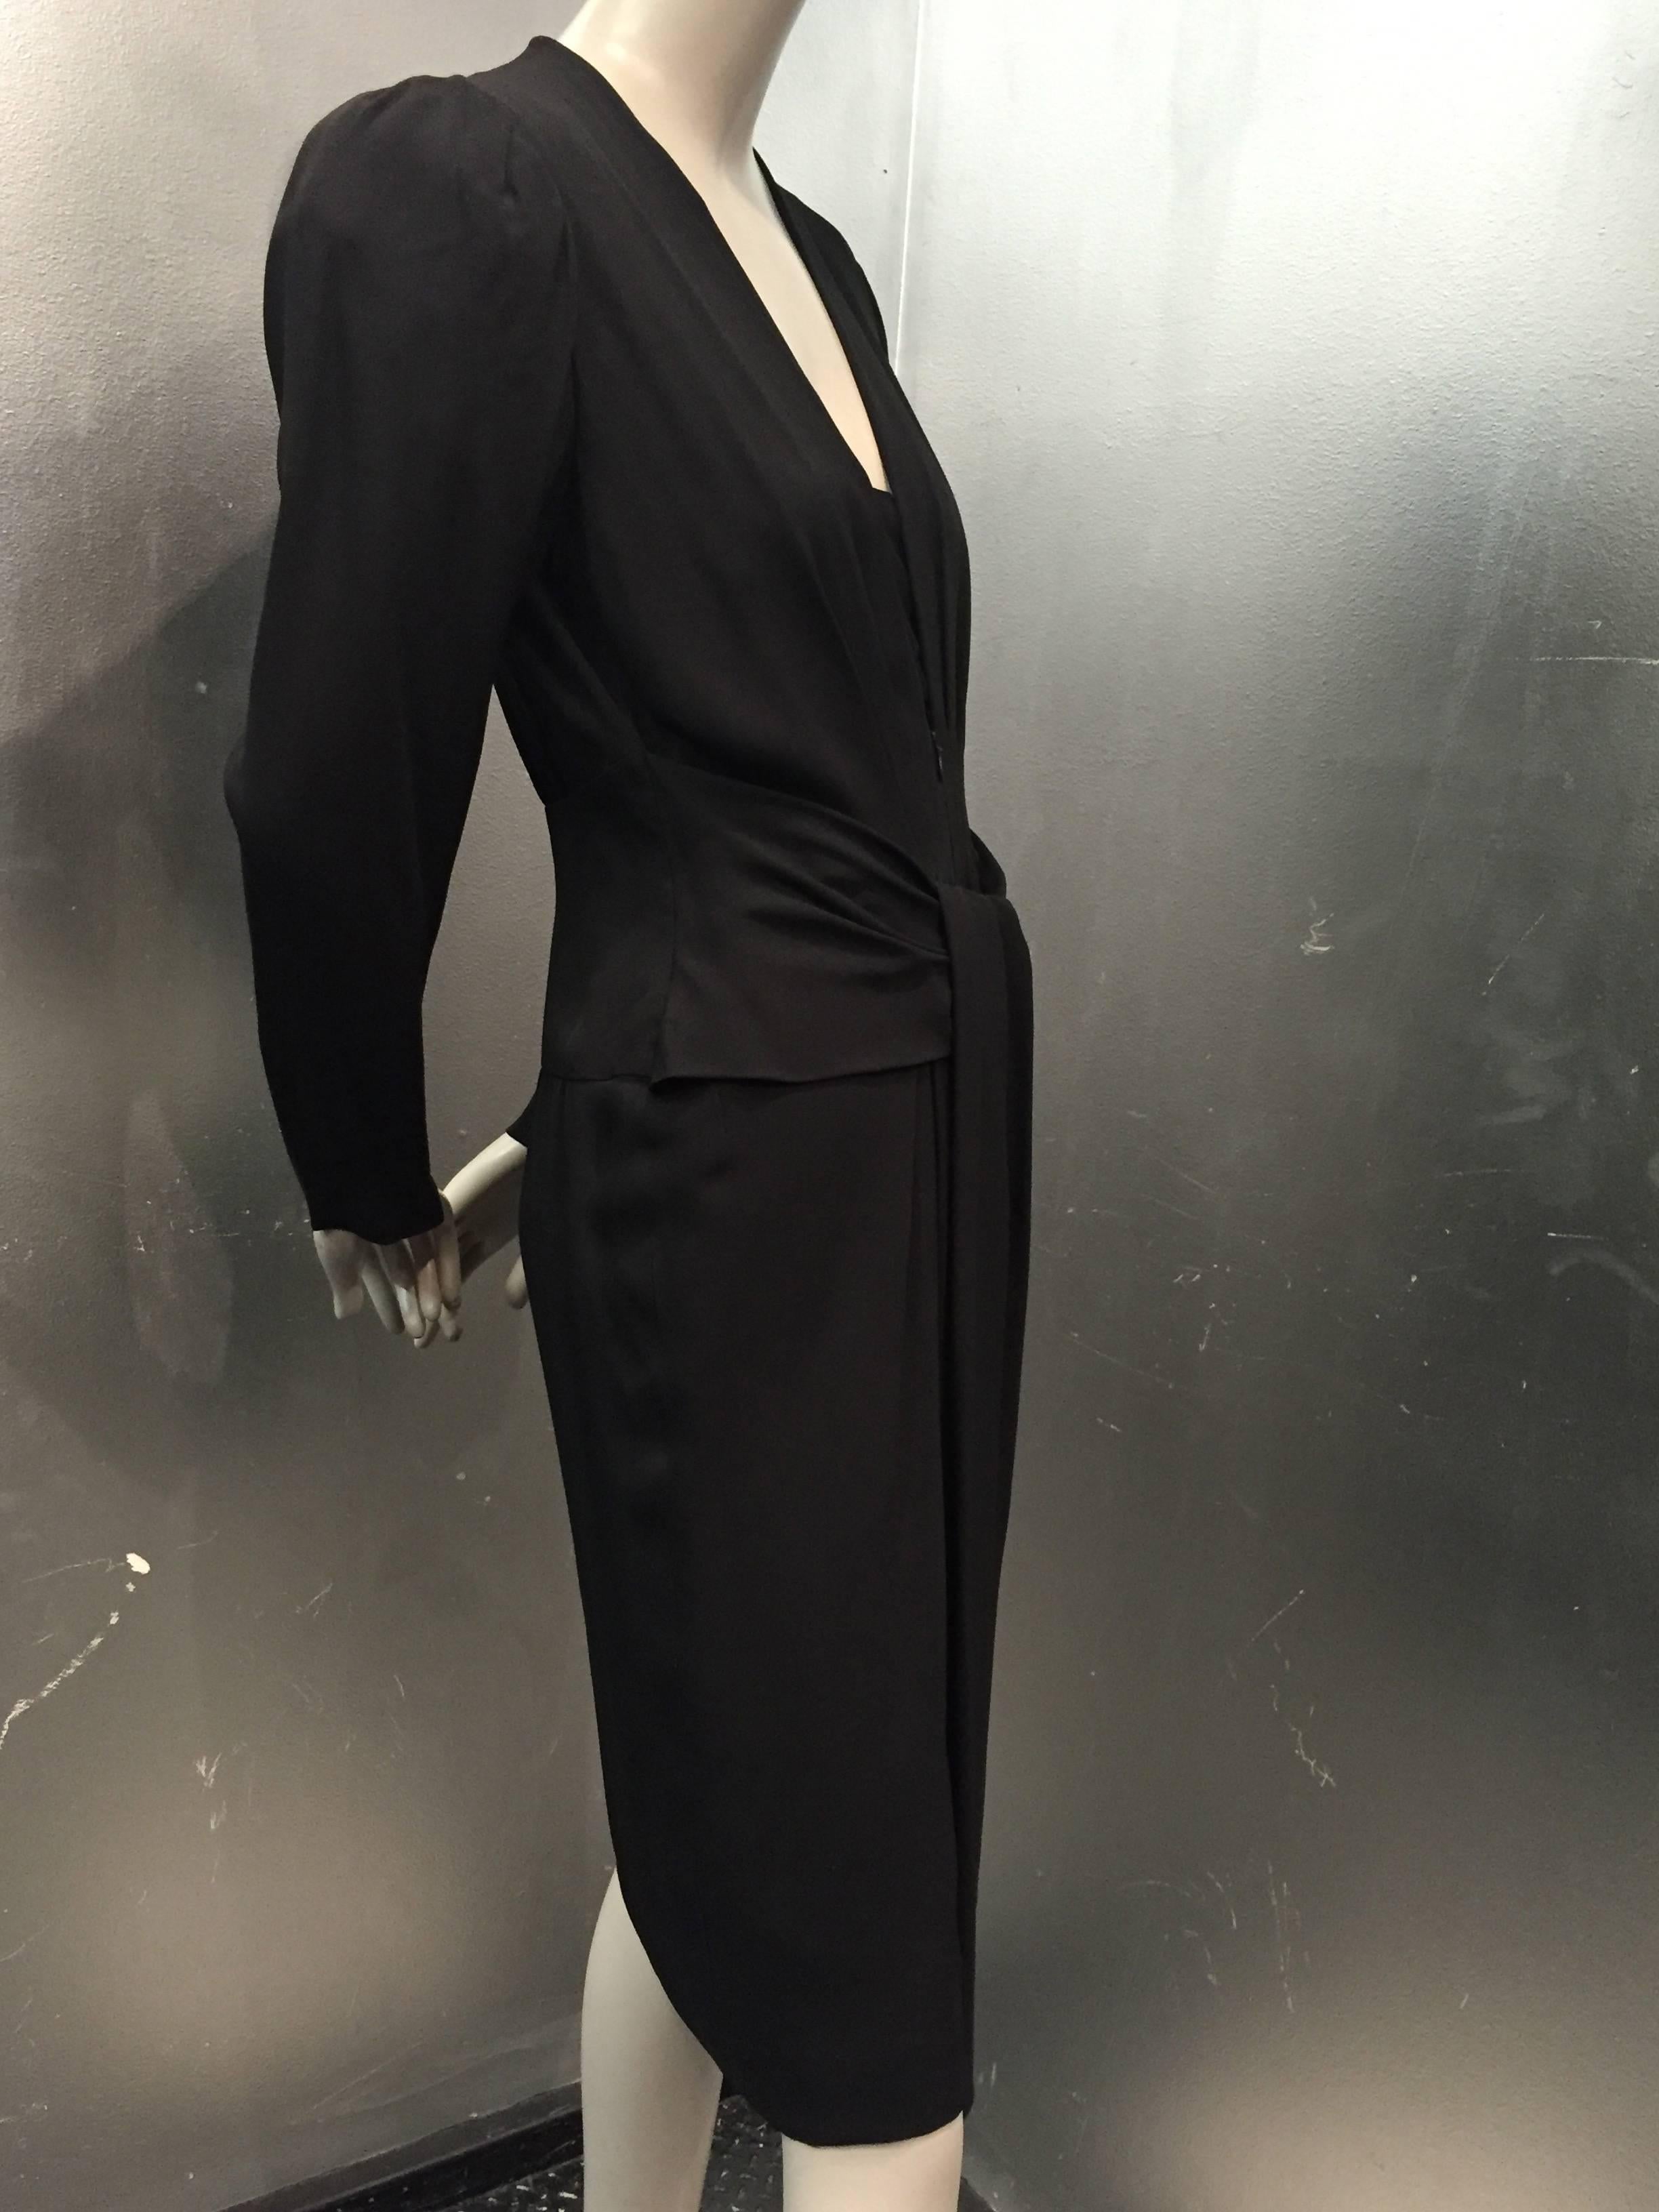 A gorgeous 1980s Ted Lapidus black rayon crepe cocktail dress with 1940s-inspired silhouette and draping details. 